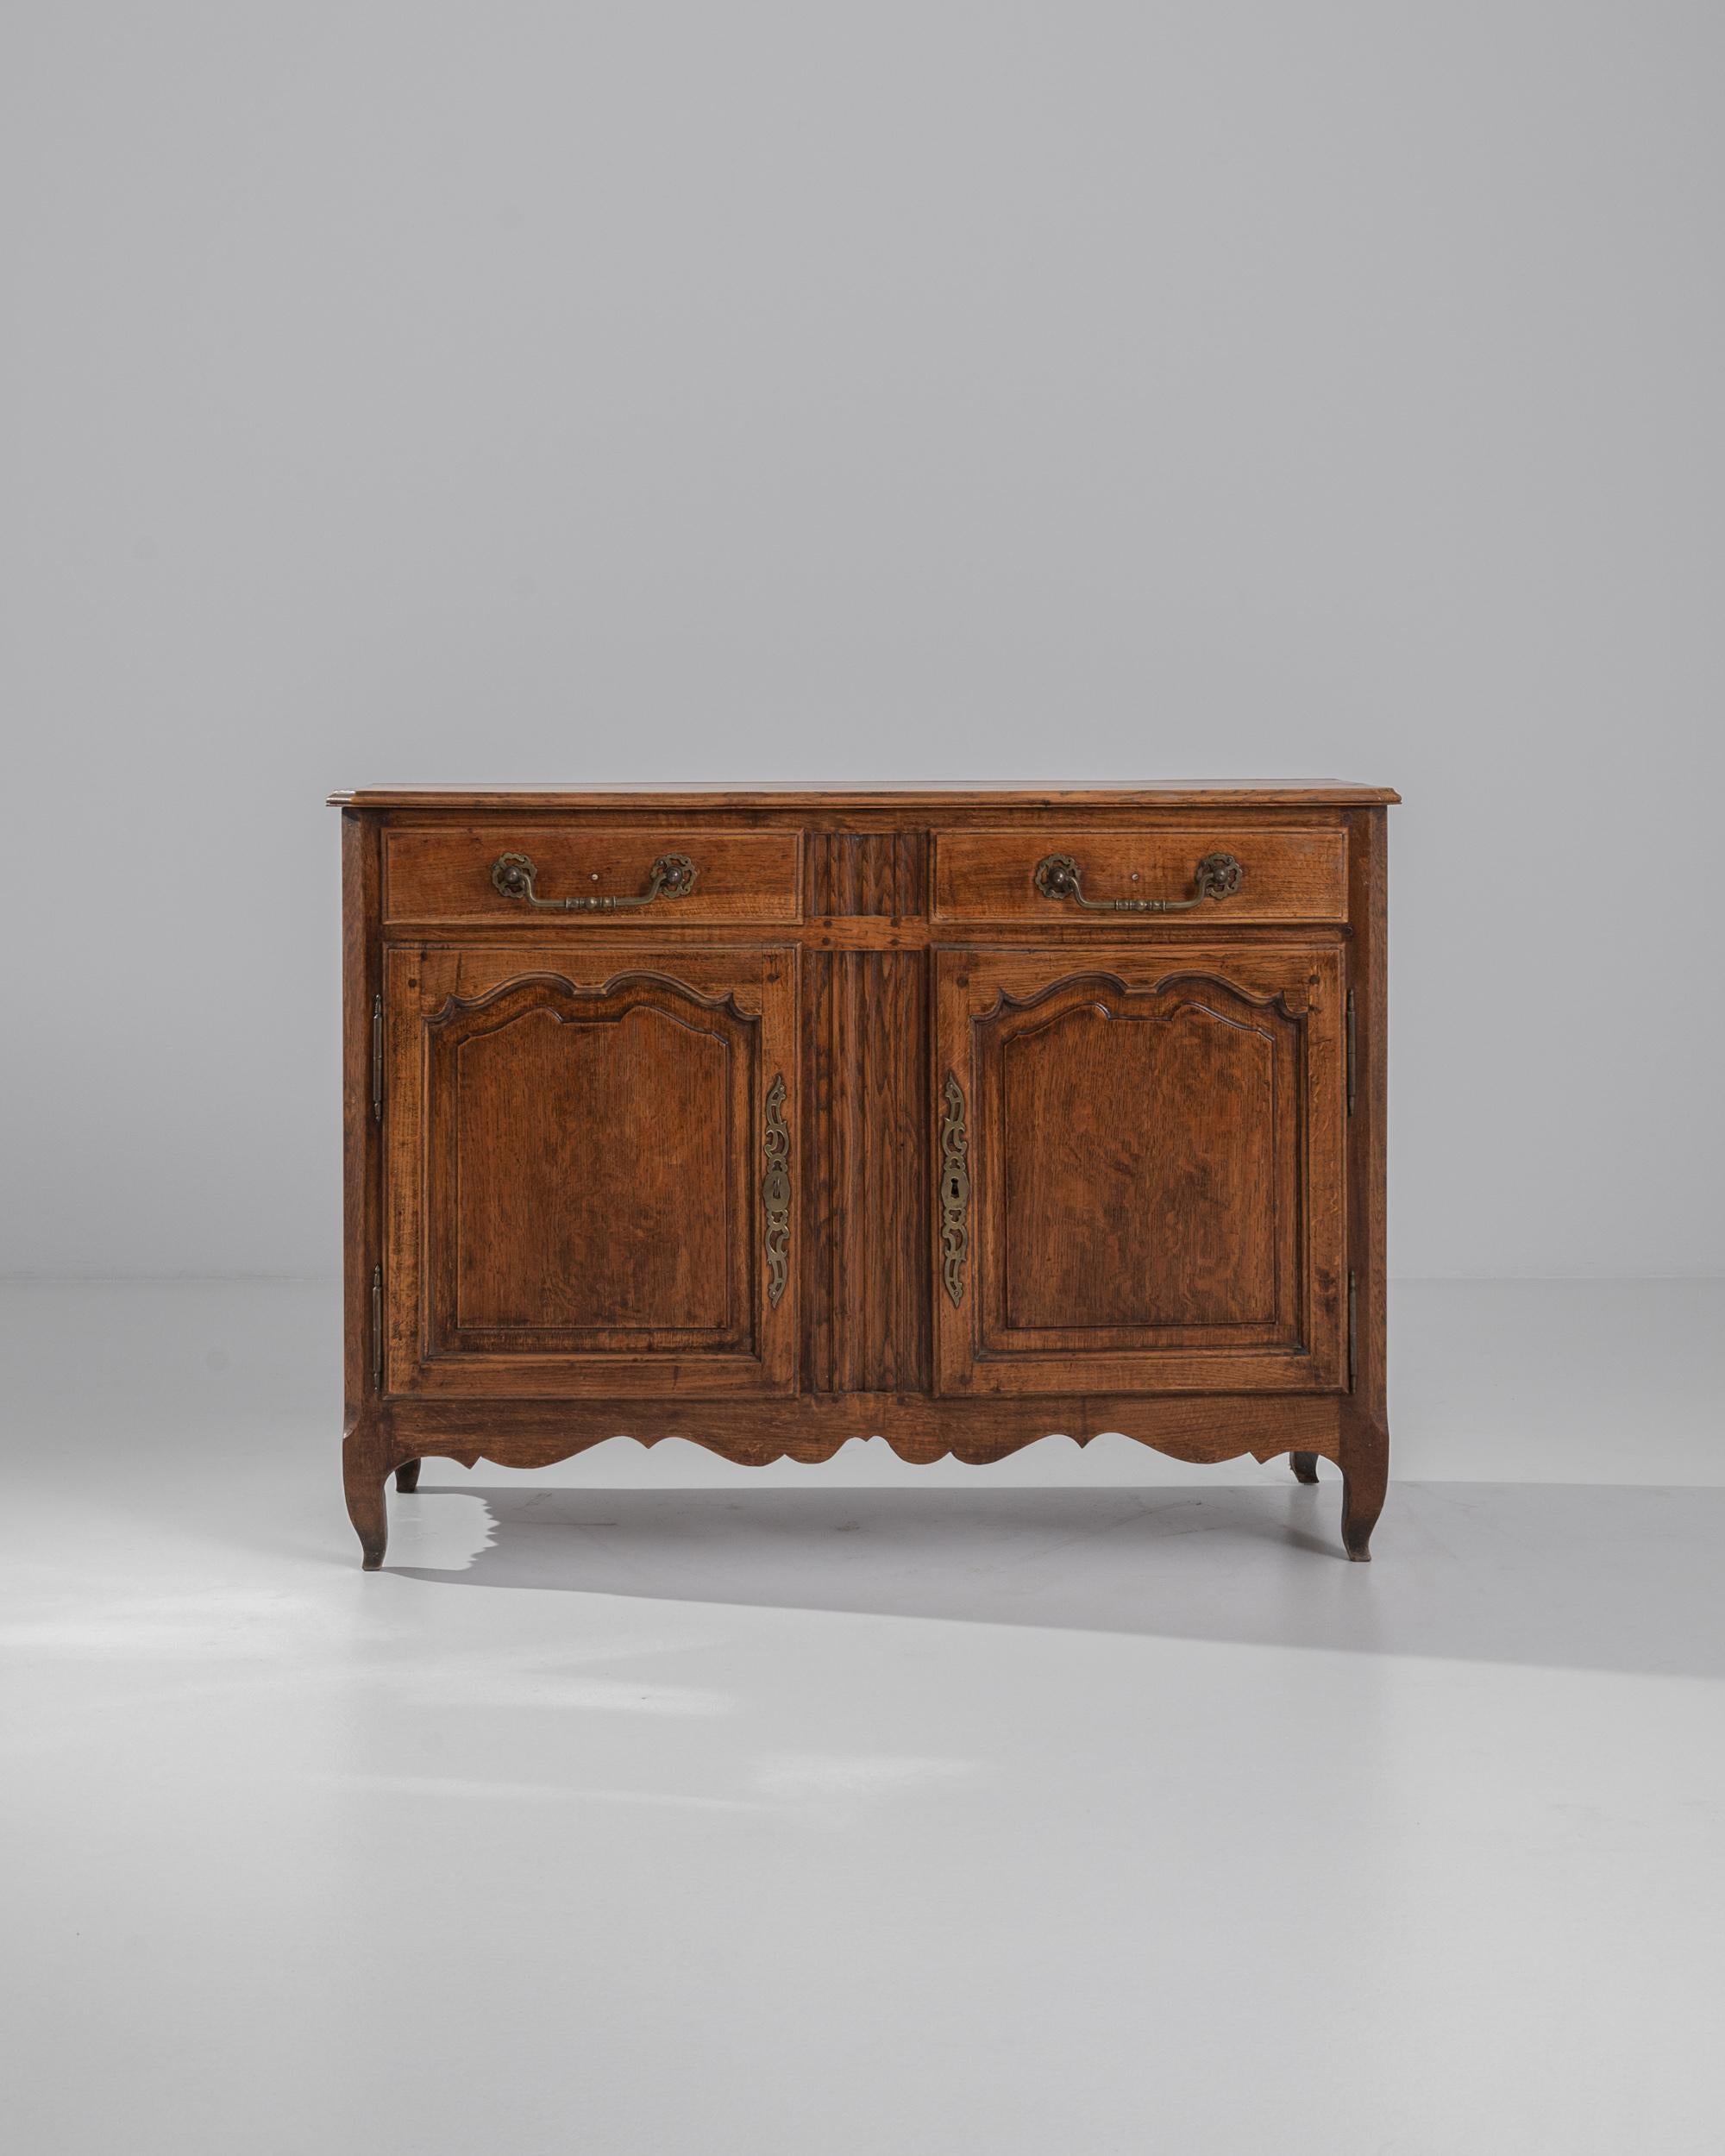 Lively decorative accents and a beautiful original patina give this antique provincial buffet a vivacious character. Made in France in the 1800s, the oak has aged to a bright, rich amber tone, inflected with a brindled grain. The scalloped curves